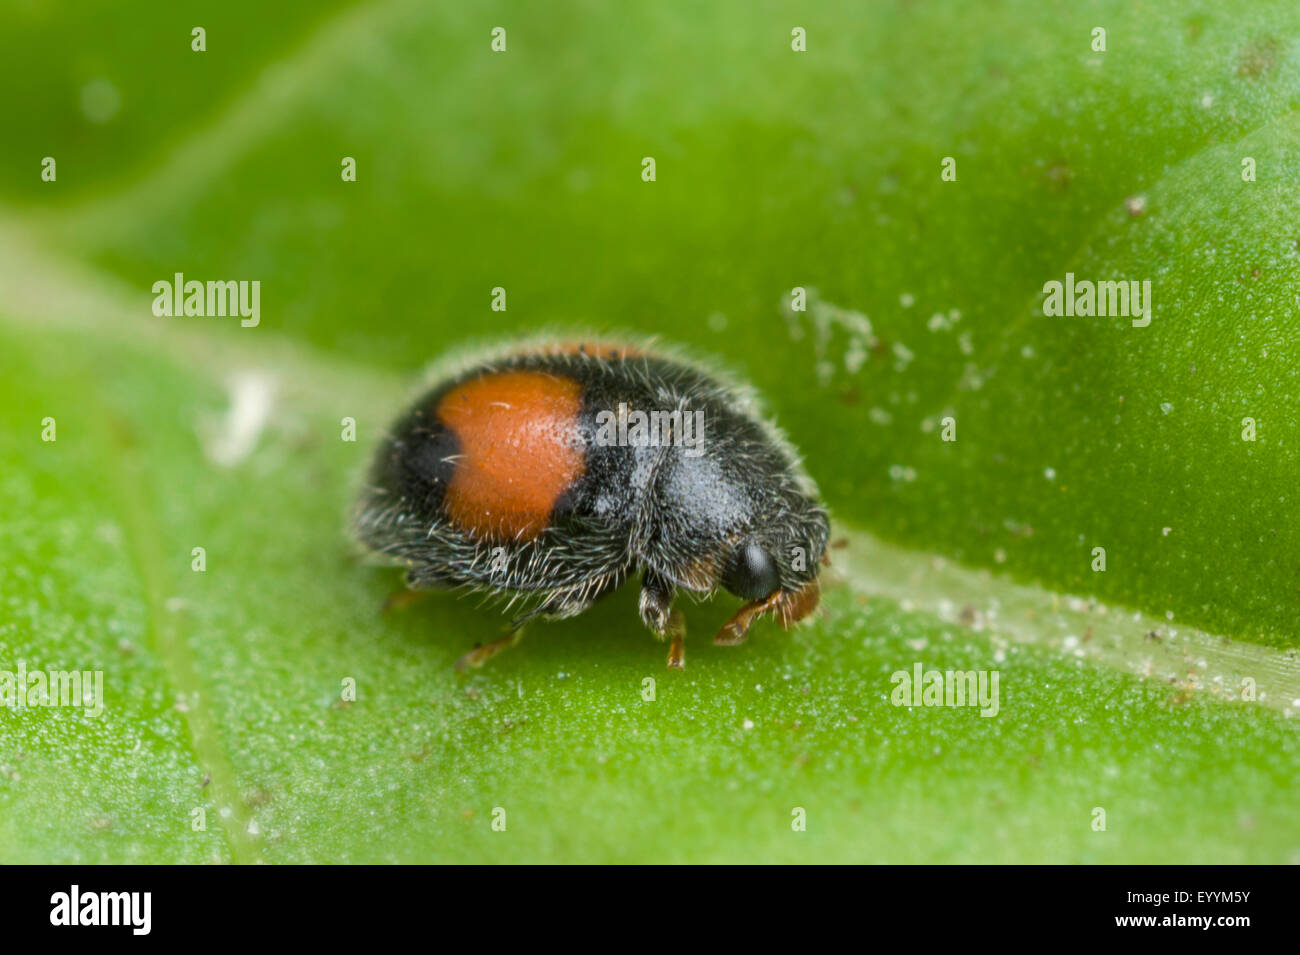 Minute two spotted ladybird beetle [Diomus notescens] Stock Photo